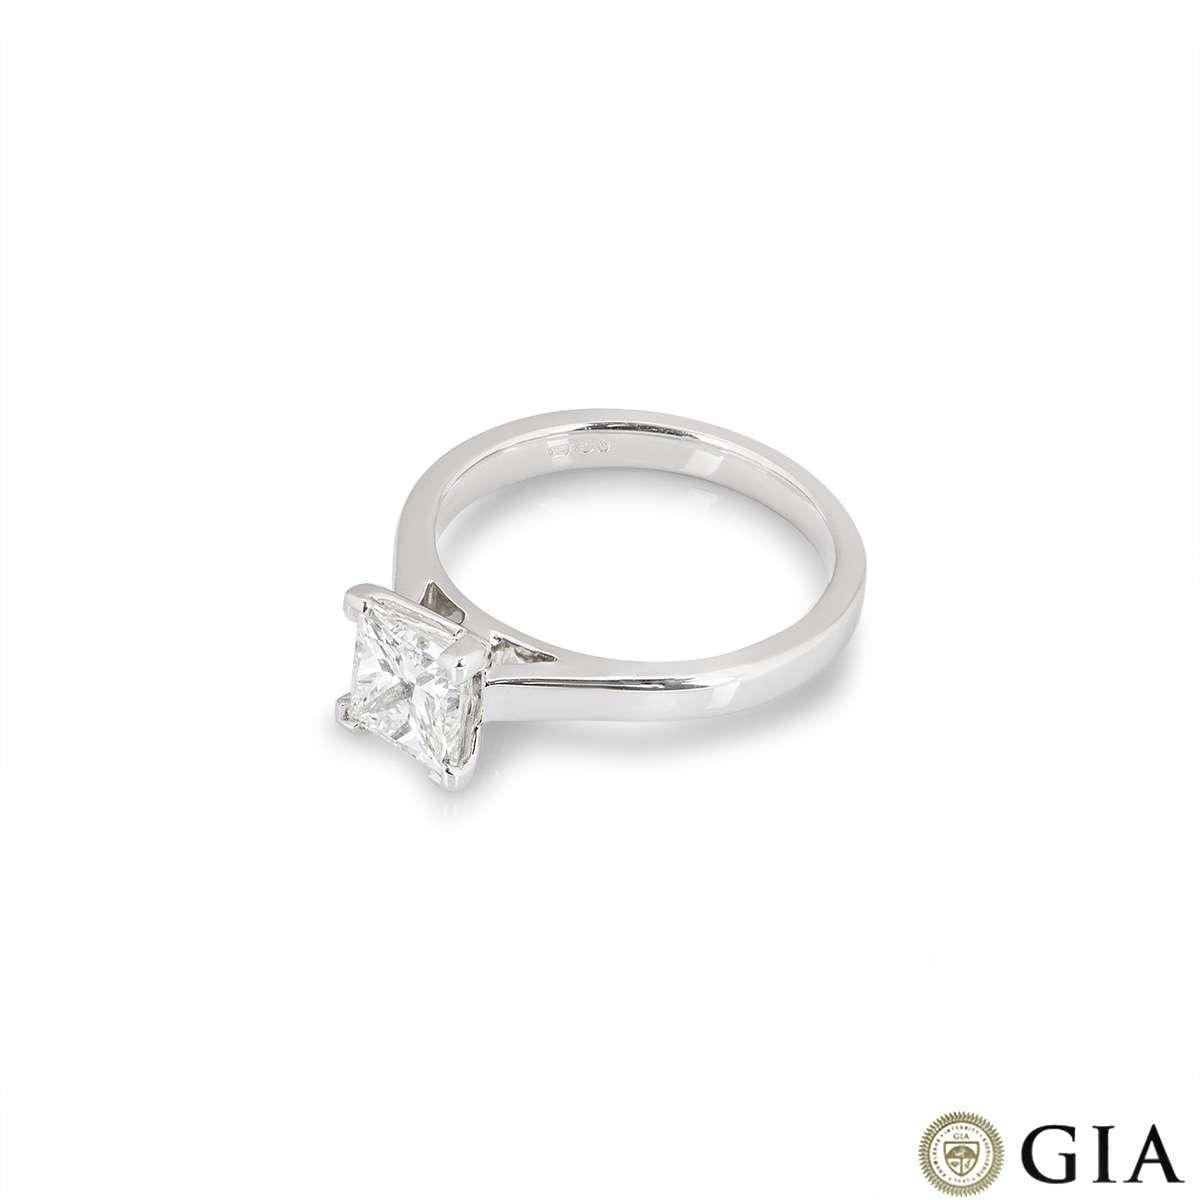 GIA Certified White Gold Princess Cut Diamond Engagement Ring 1.30ct H/VS1 In New Condition For Sale In London, GB